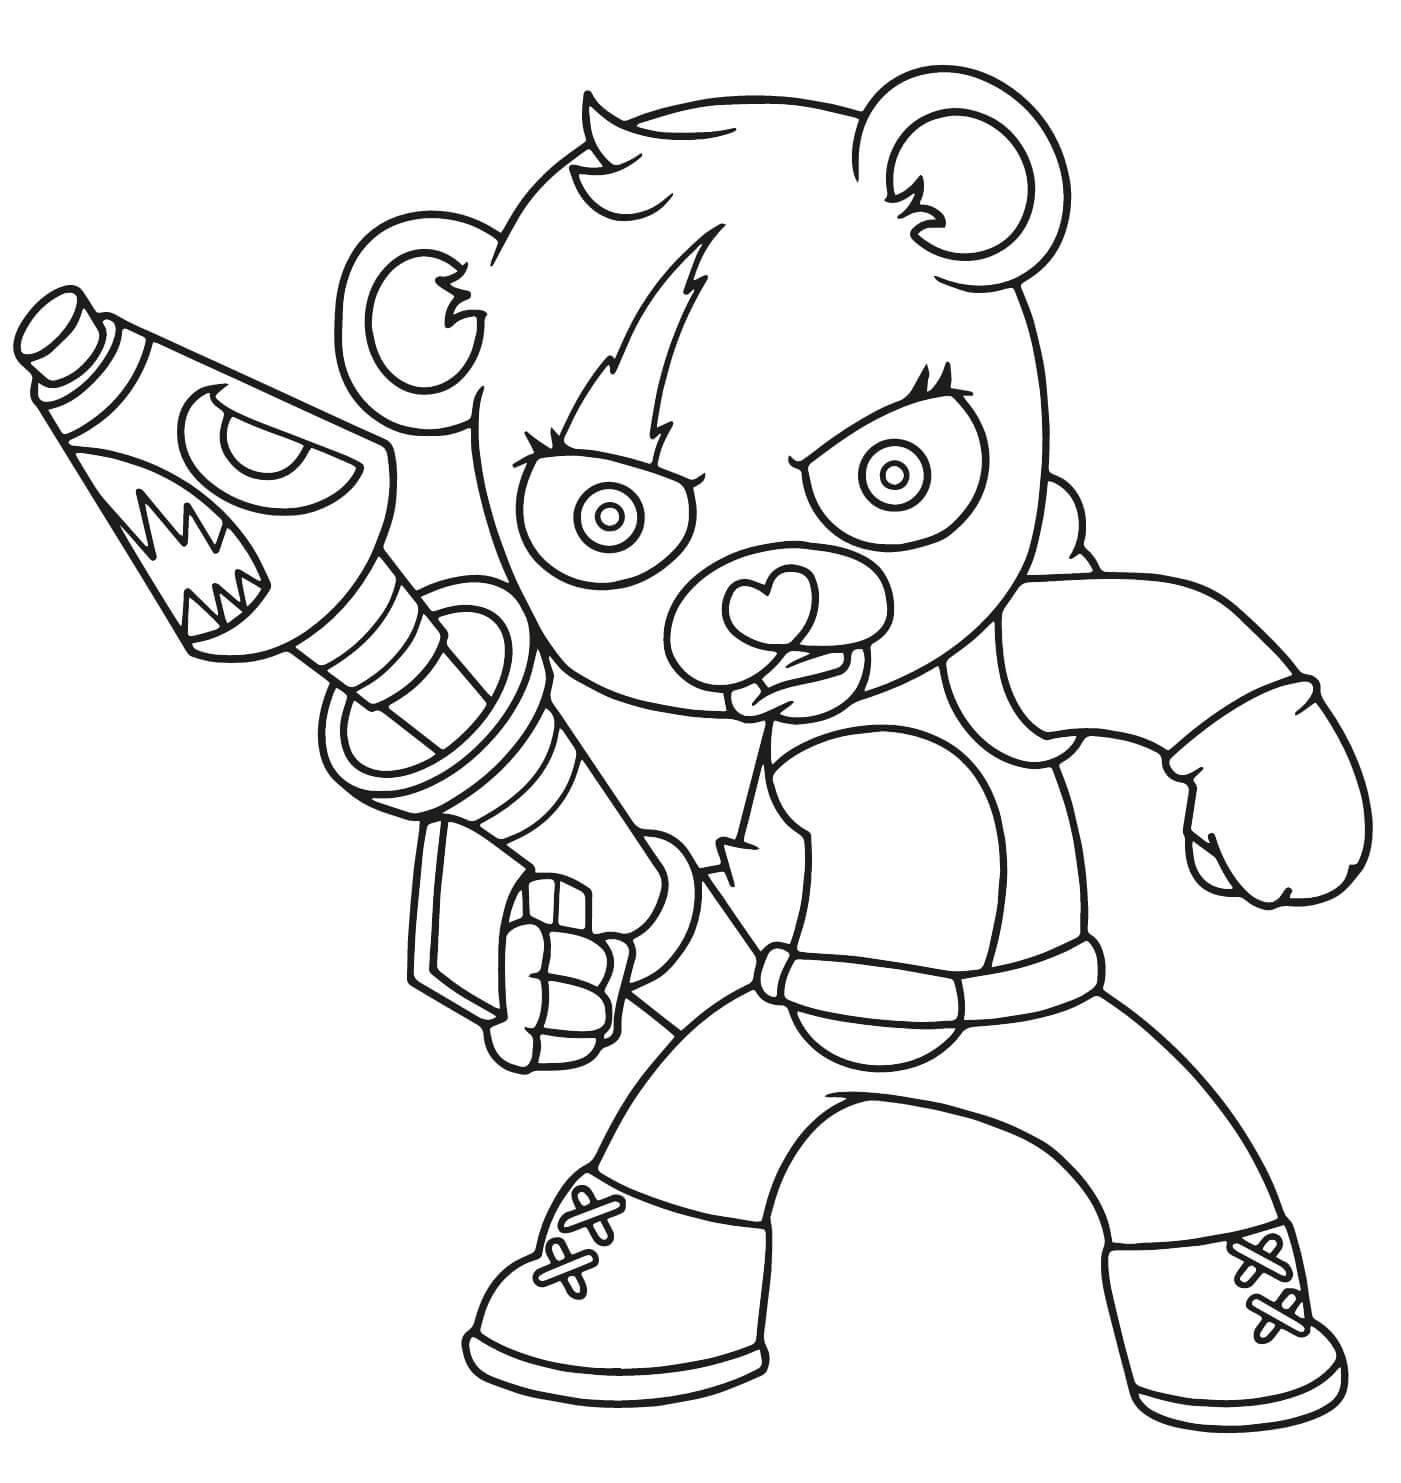 Cuddle Team Leader Missile Coloring Page